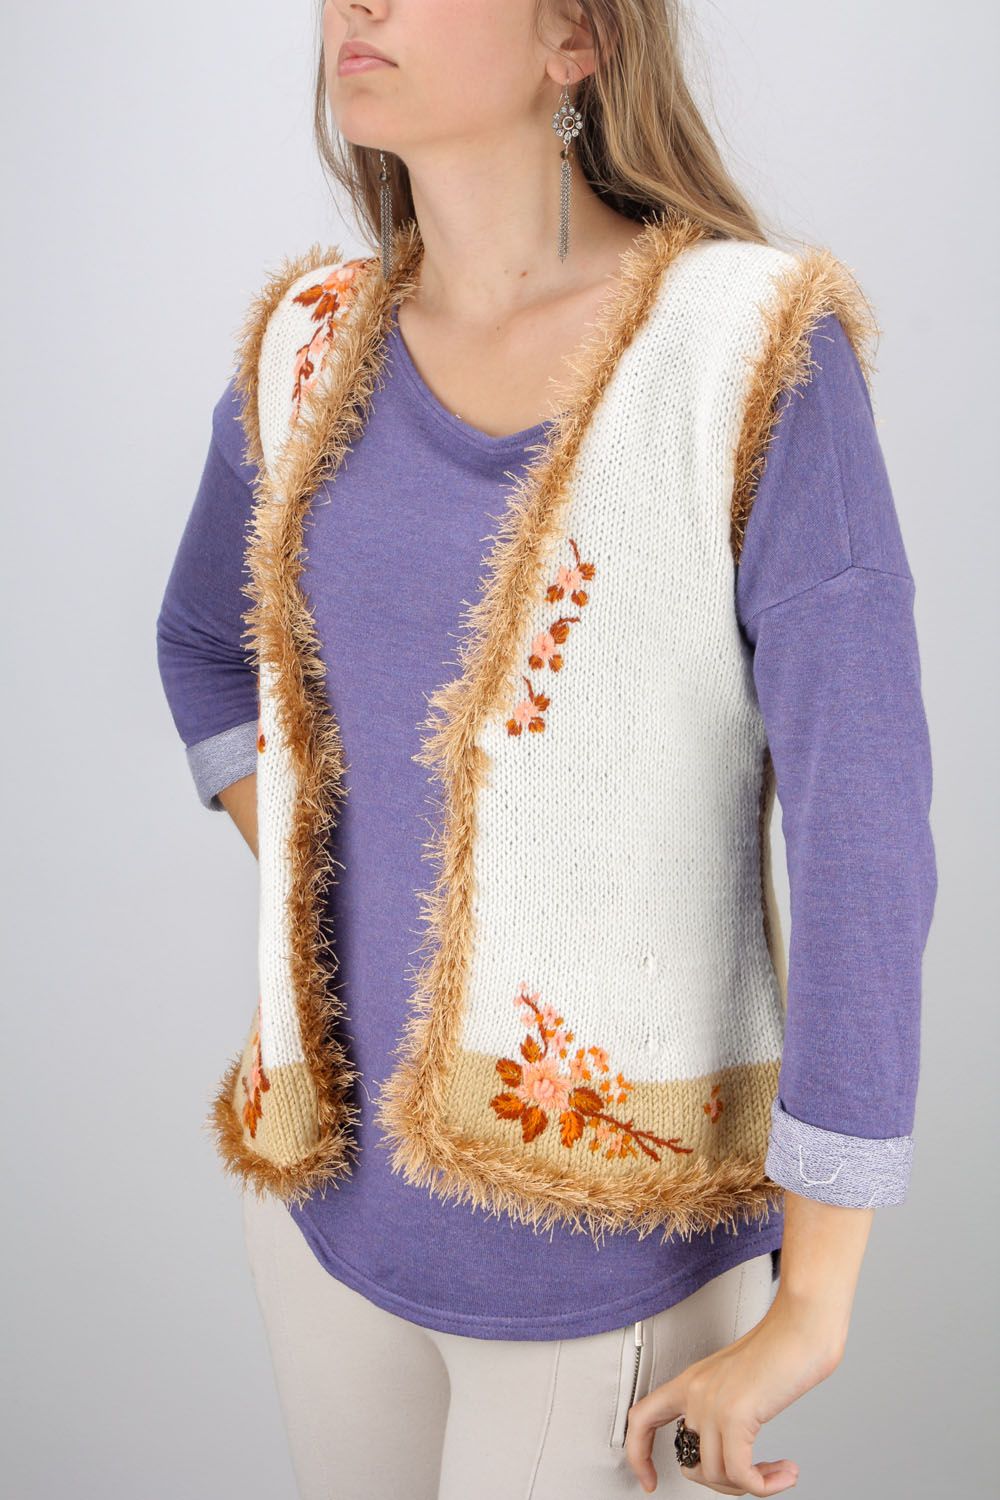 Homemade knitted vest Sunny Autumn photo 1